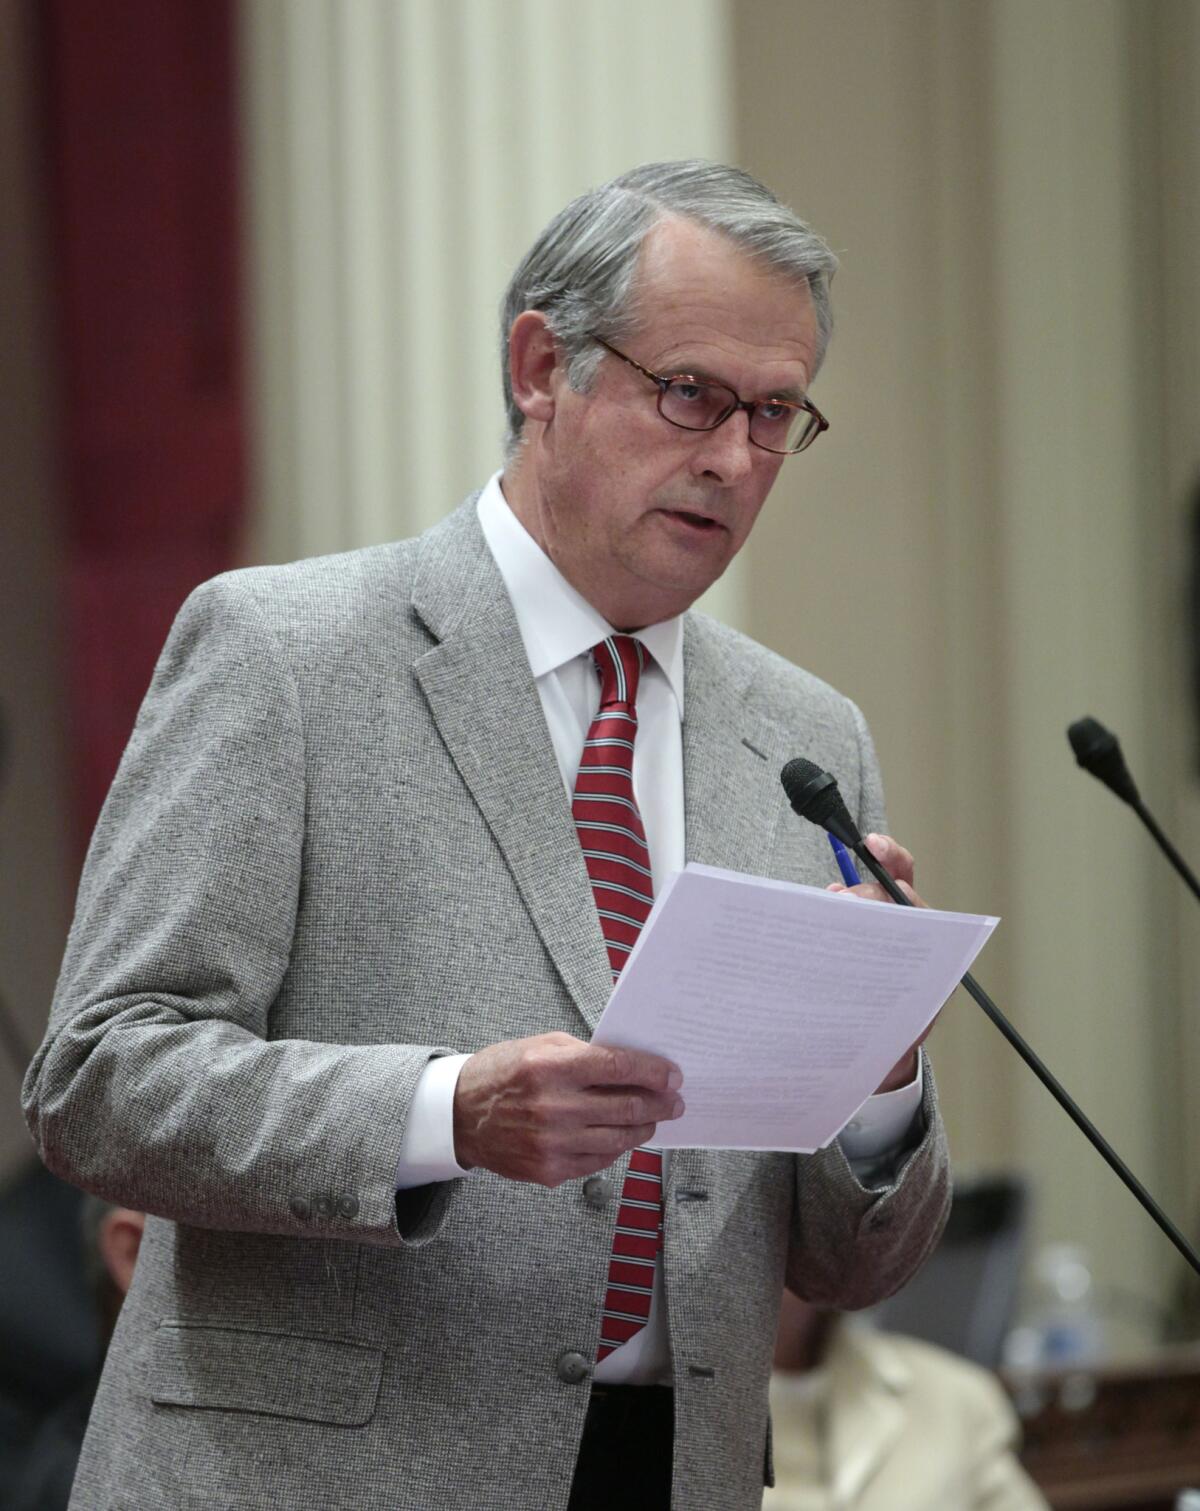 Then-state Sen. Bill Emmerson (R-Redlands) discusses California's budget at the Capitol.